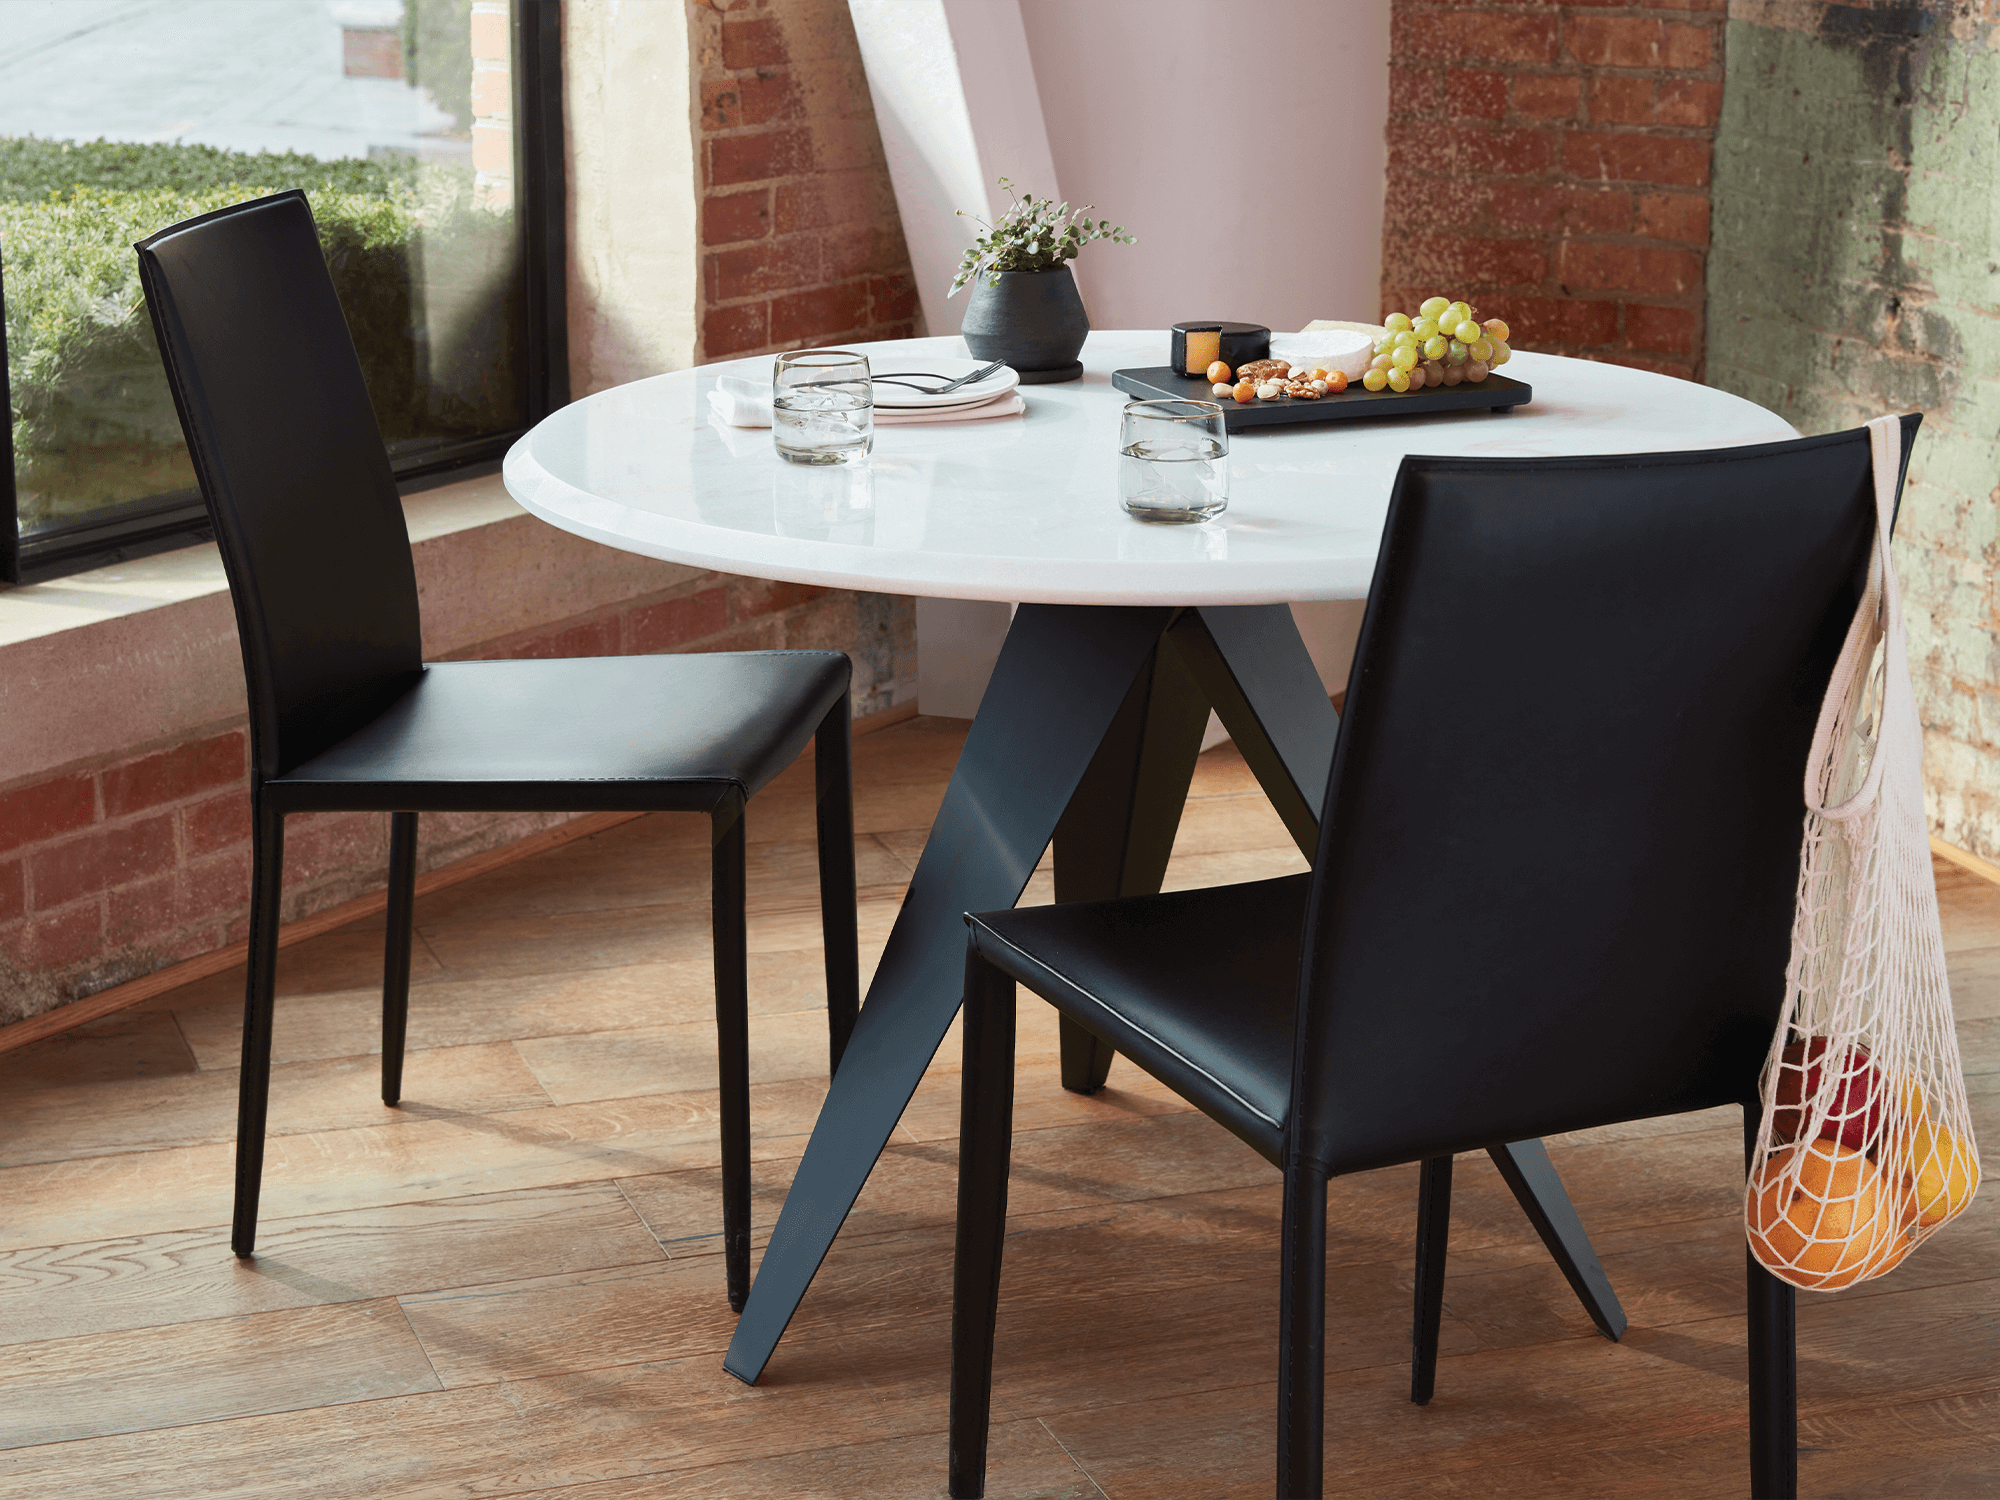 Acel Dining Chair Eq3 Leather, High Seat Dining Room Chairs